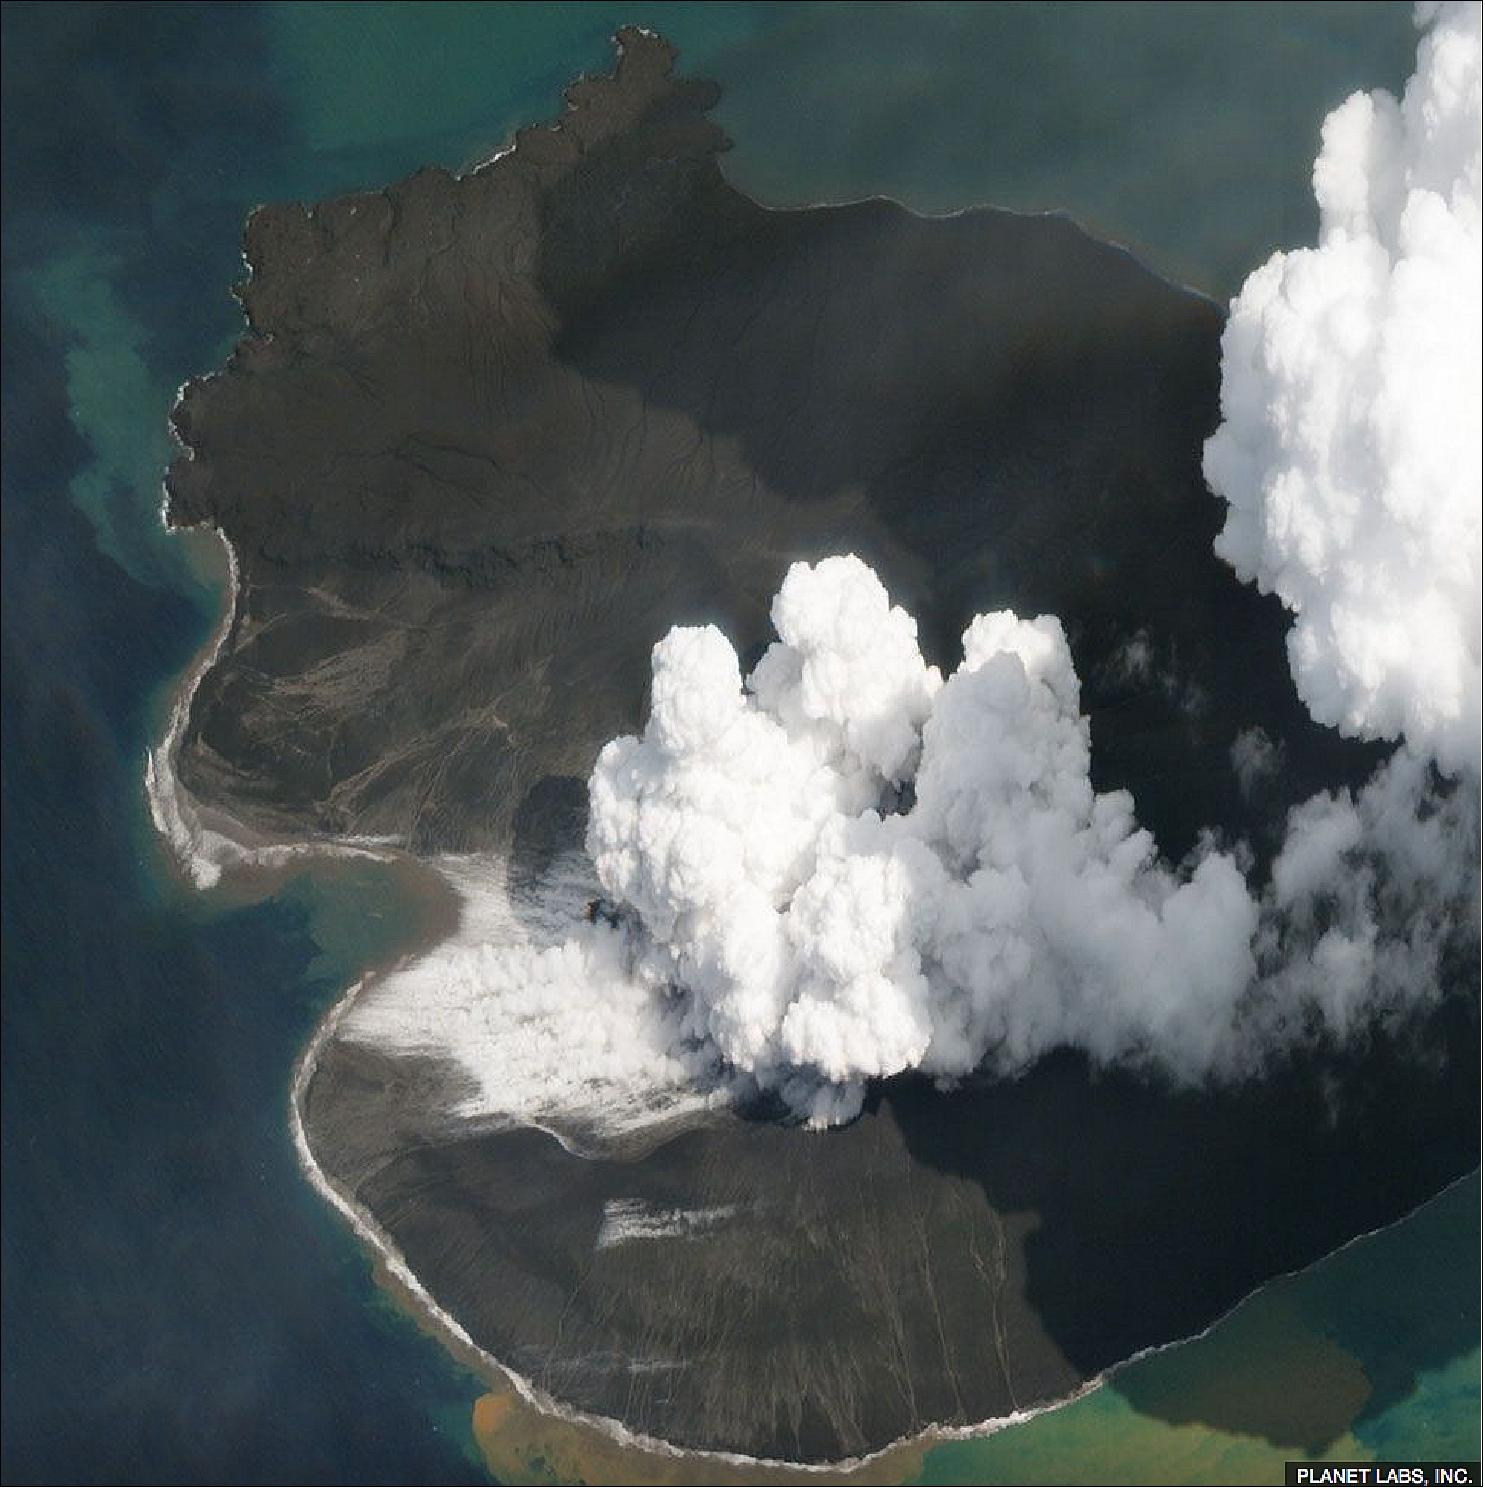 Figure 14: Image of Anak Krakatau as acquired on 2 January 2019 by Planet's SkySat satellite constellation (image credit: Planet Labs Inc.)